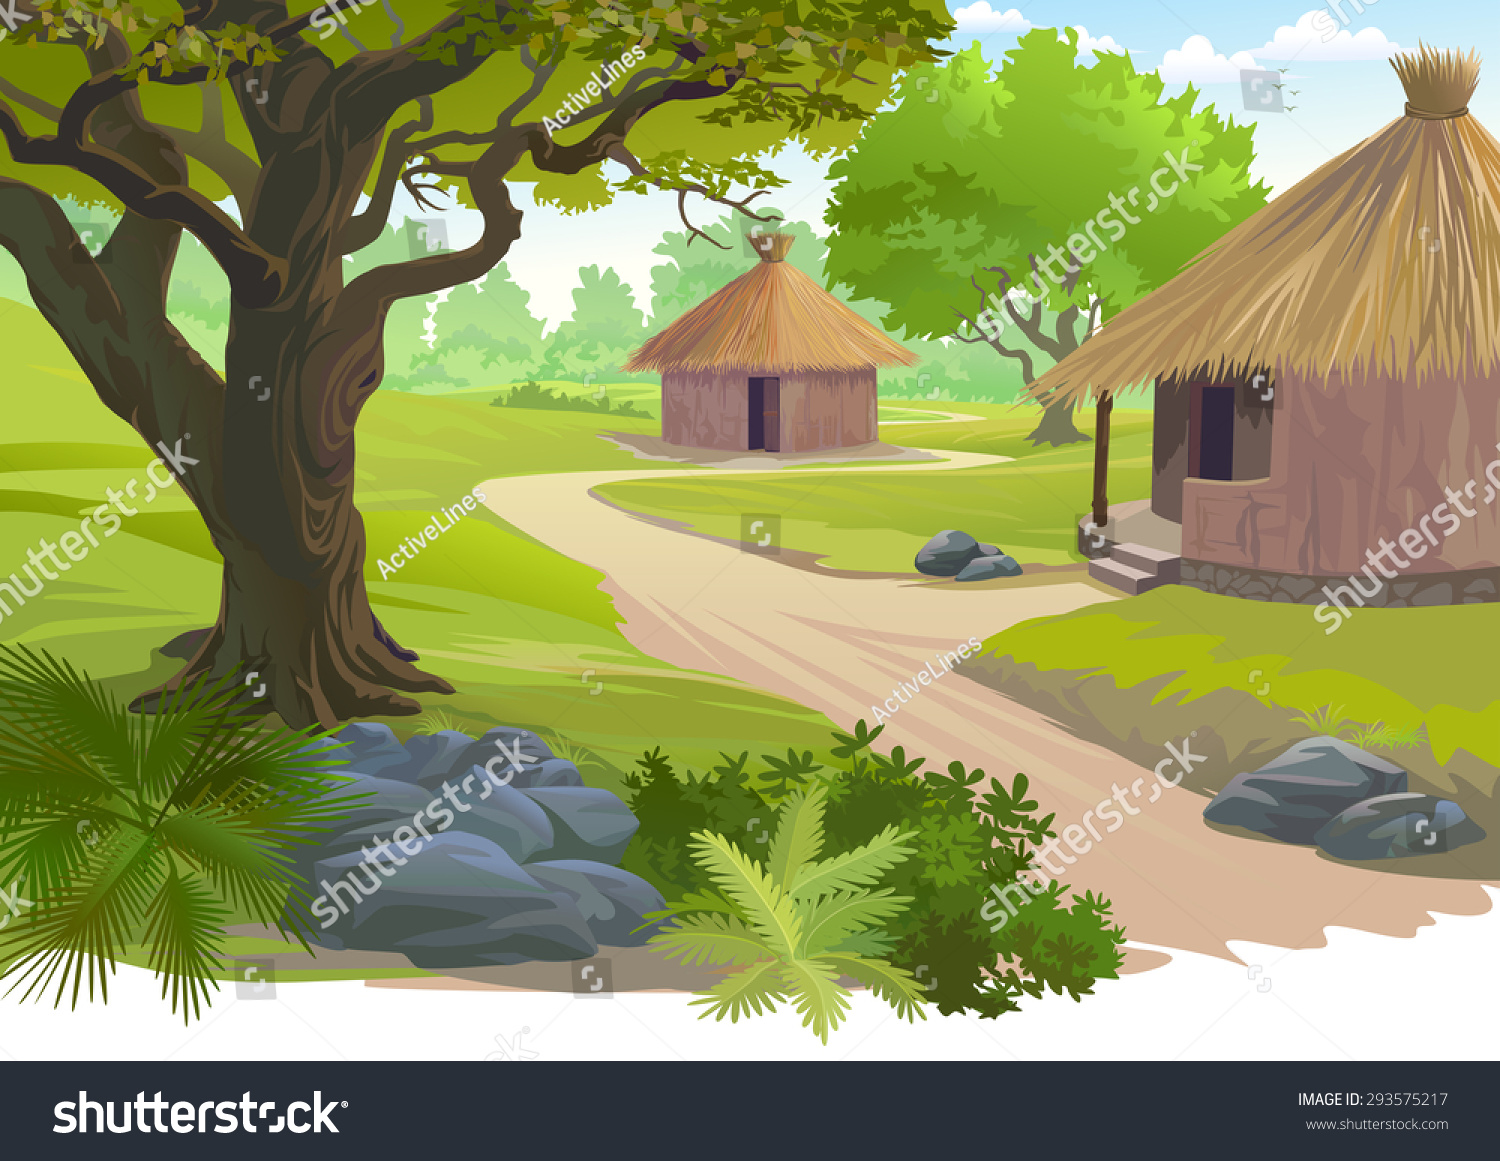 clipart of village life - photo #16